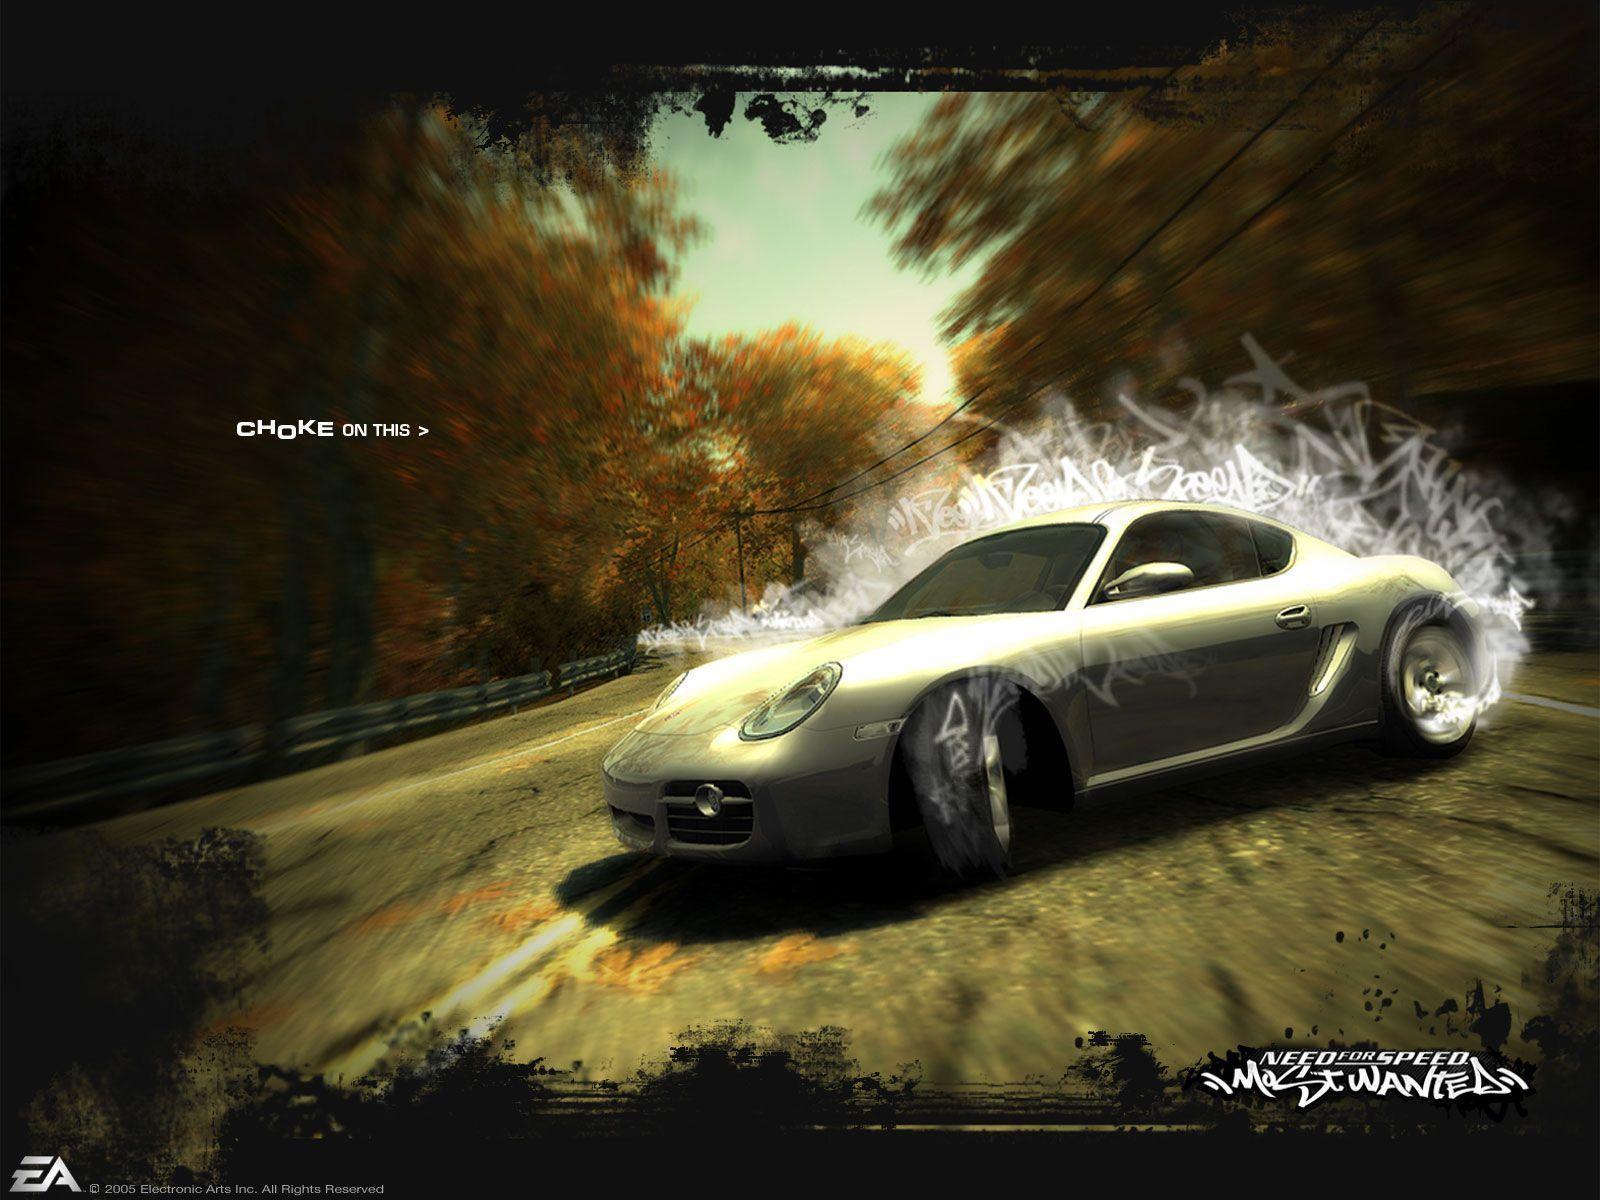 Wallpaper NFS Most Wanted